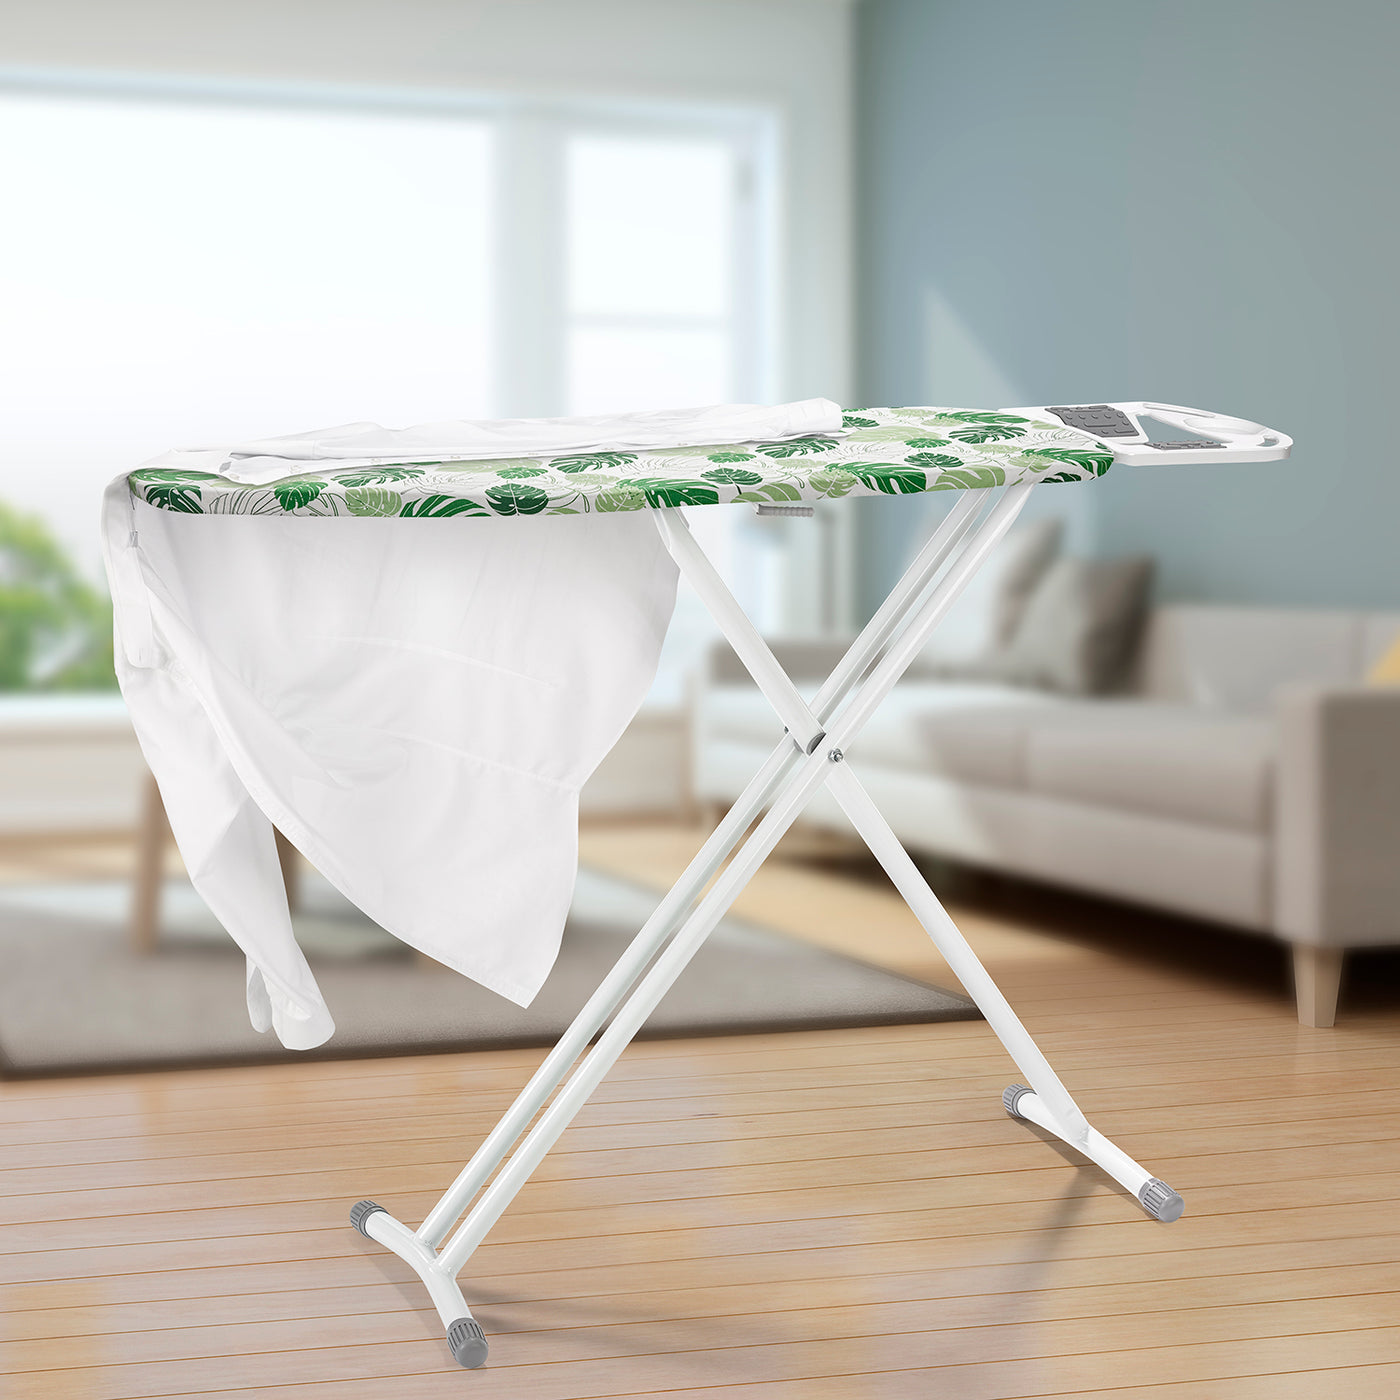 40" x 15" Deluxe Ironing Station